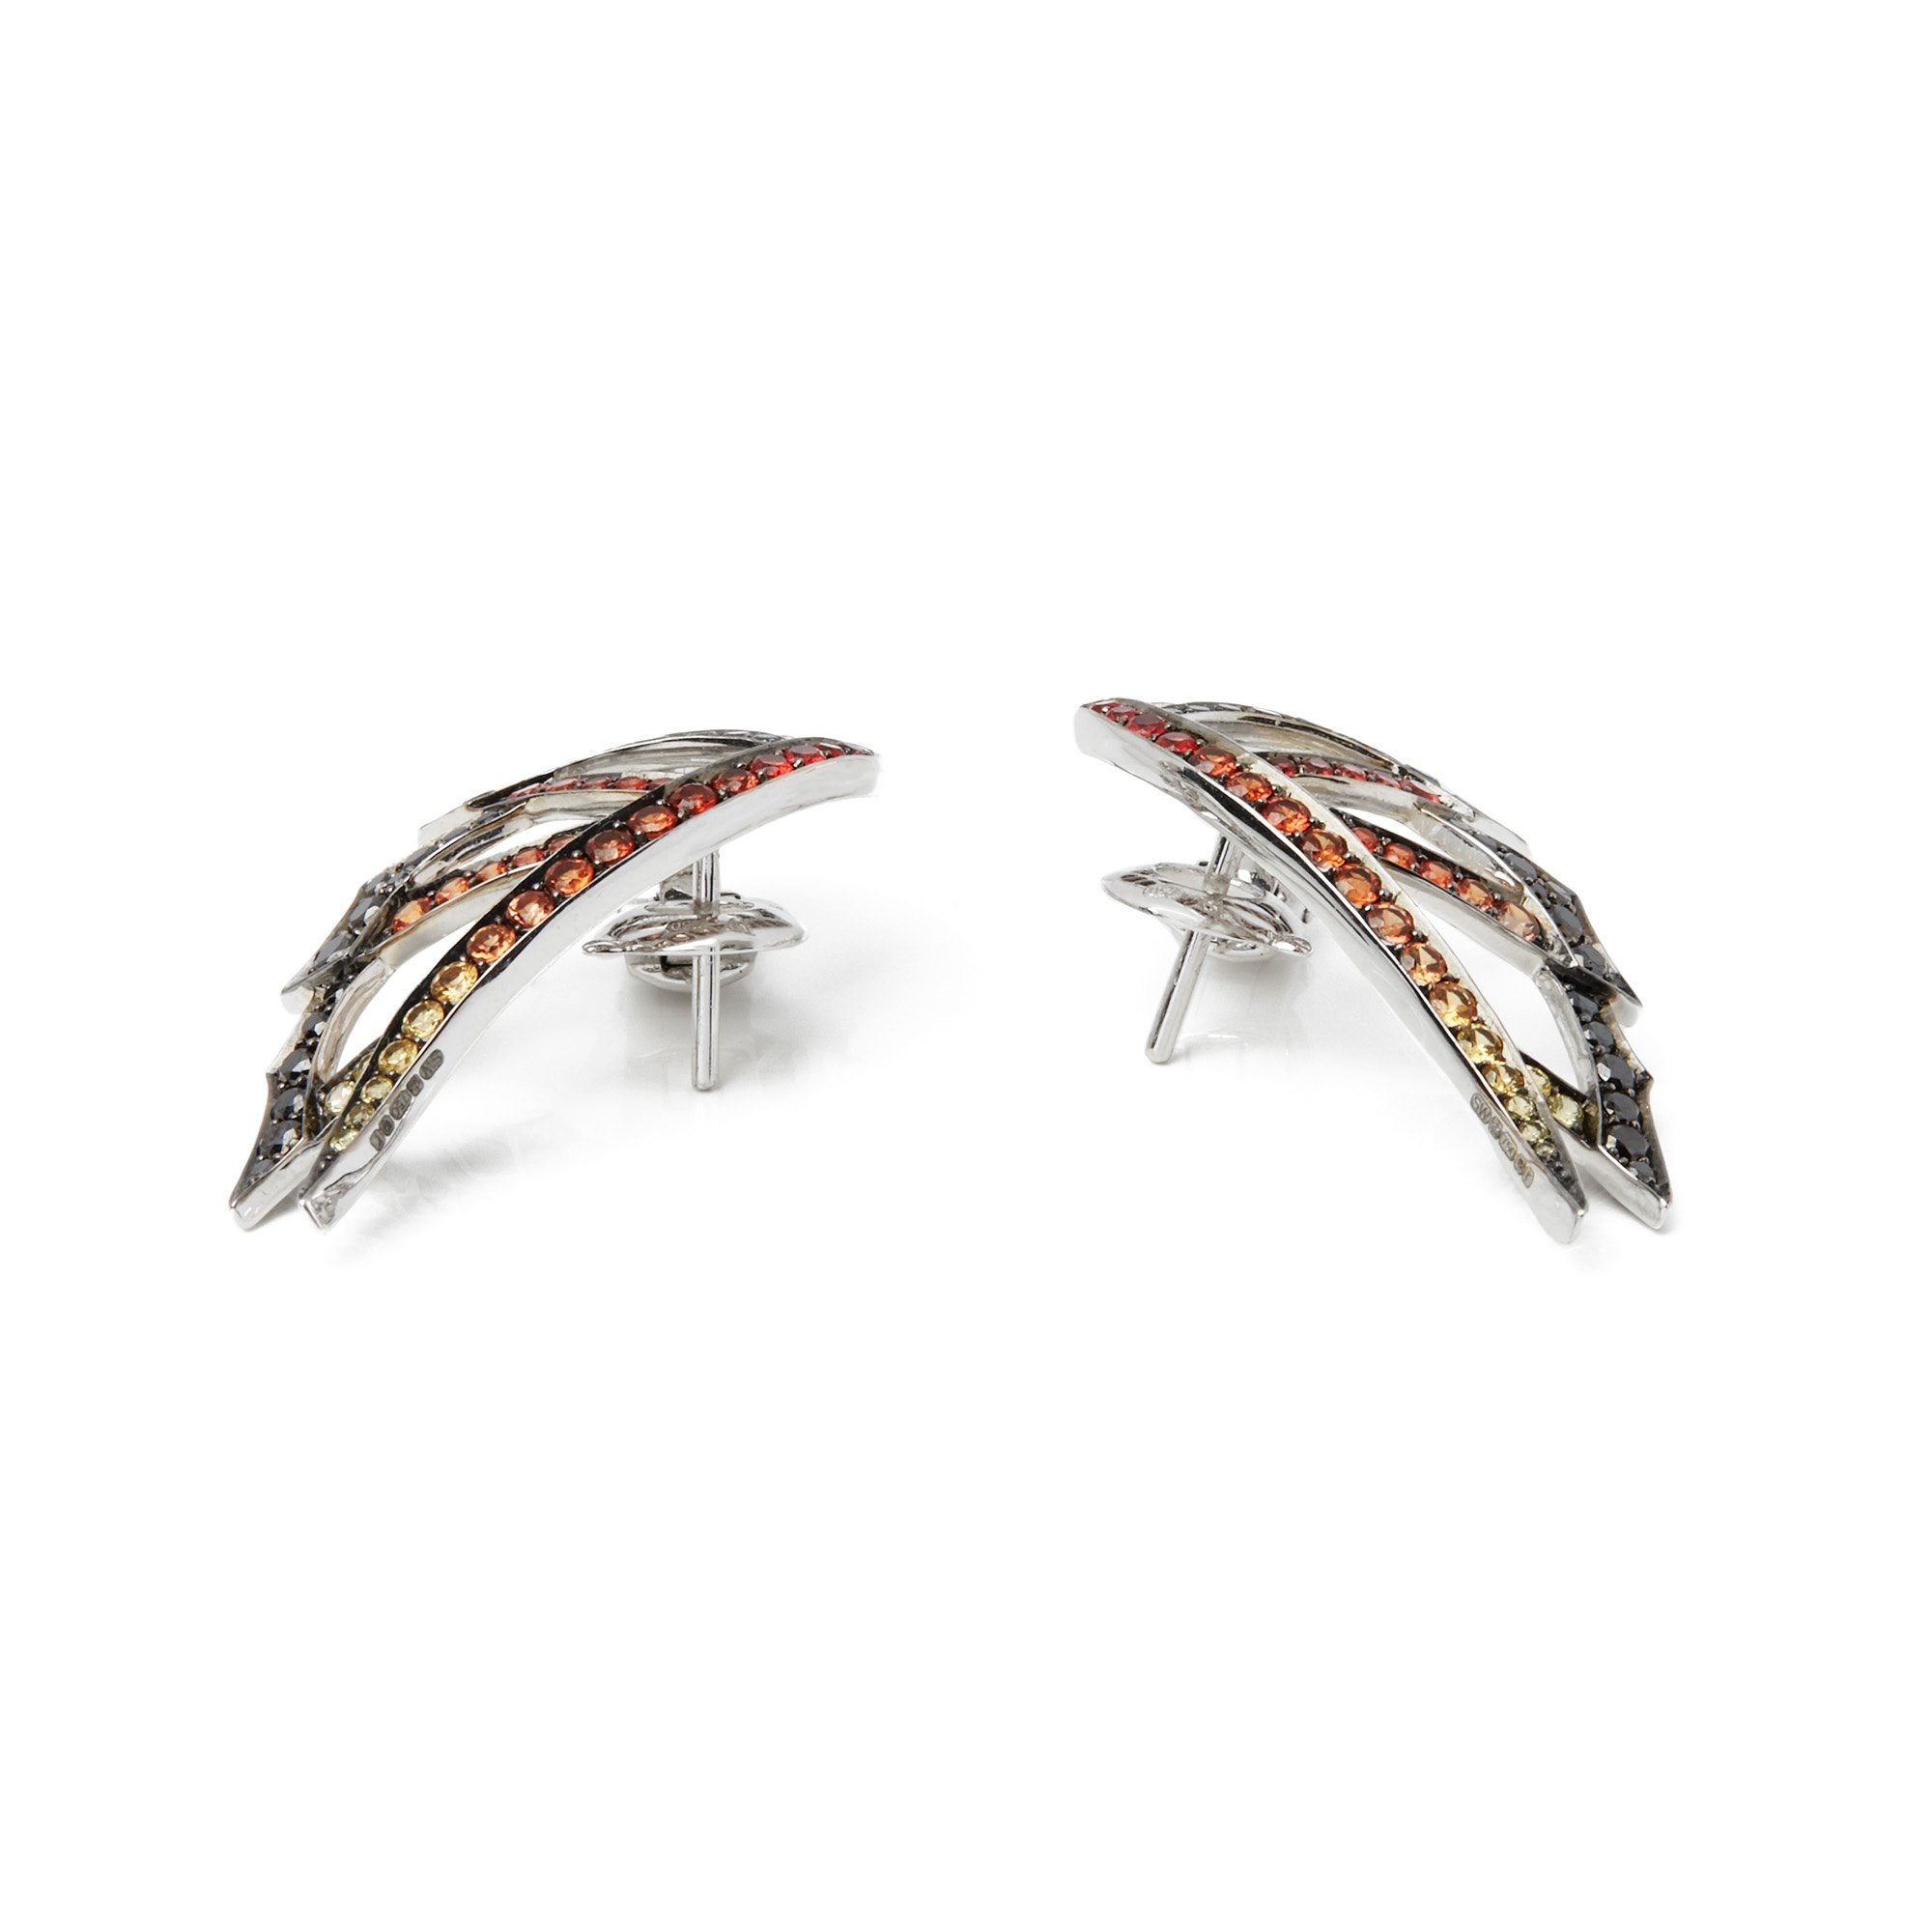 Stephen Webster Magnipheasant 18ct White Gold Mixed Sapphire and Diamond Earrings